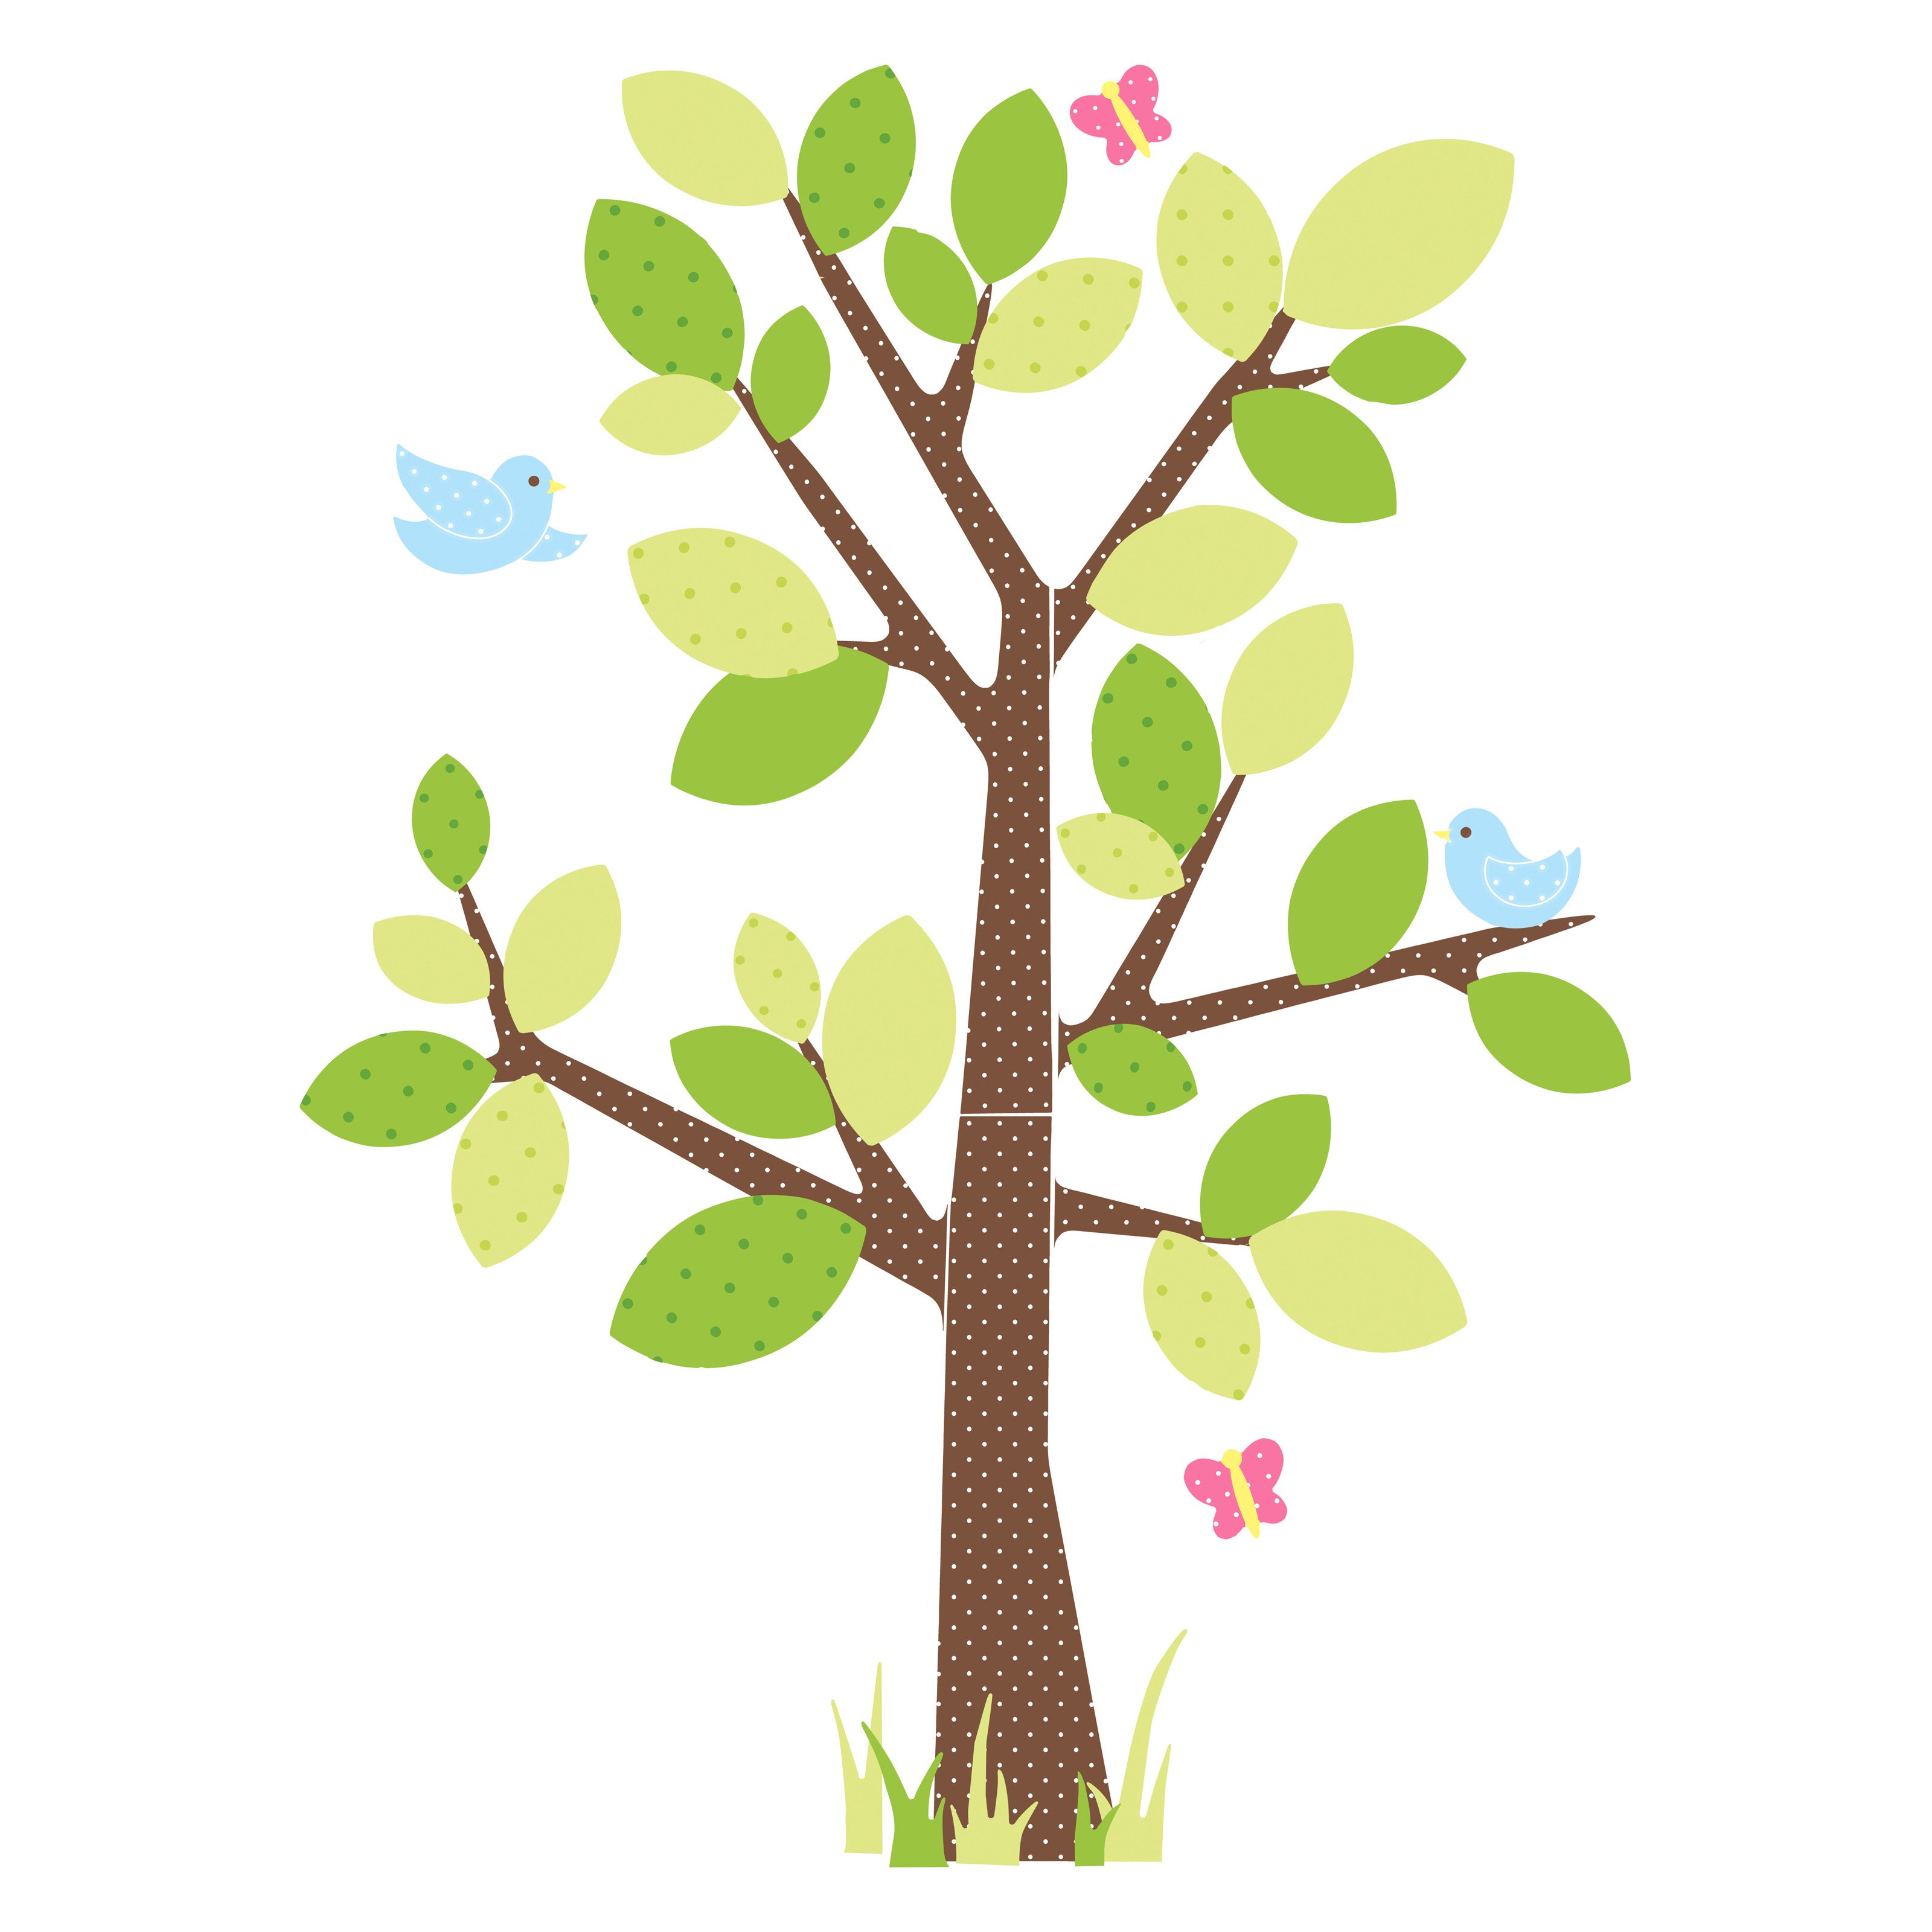 Cartoon Tree With Branches | Free Download Clip Art | Free Clip ...